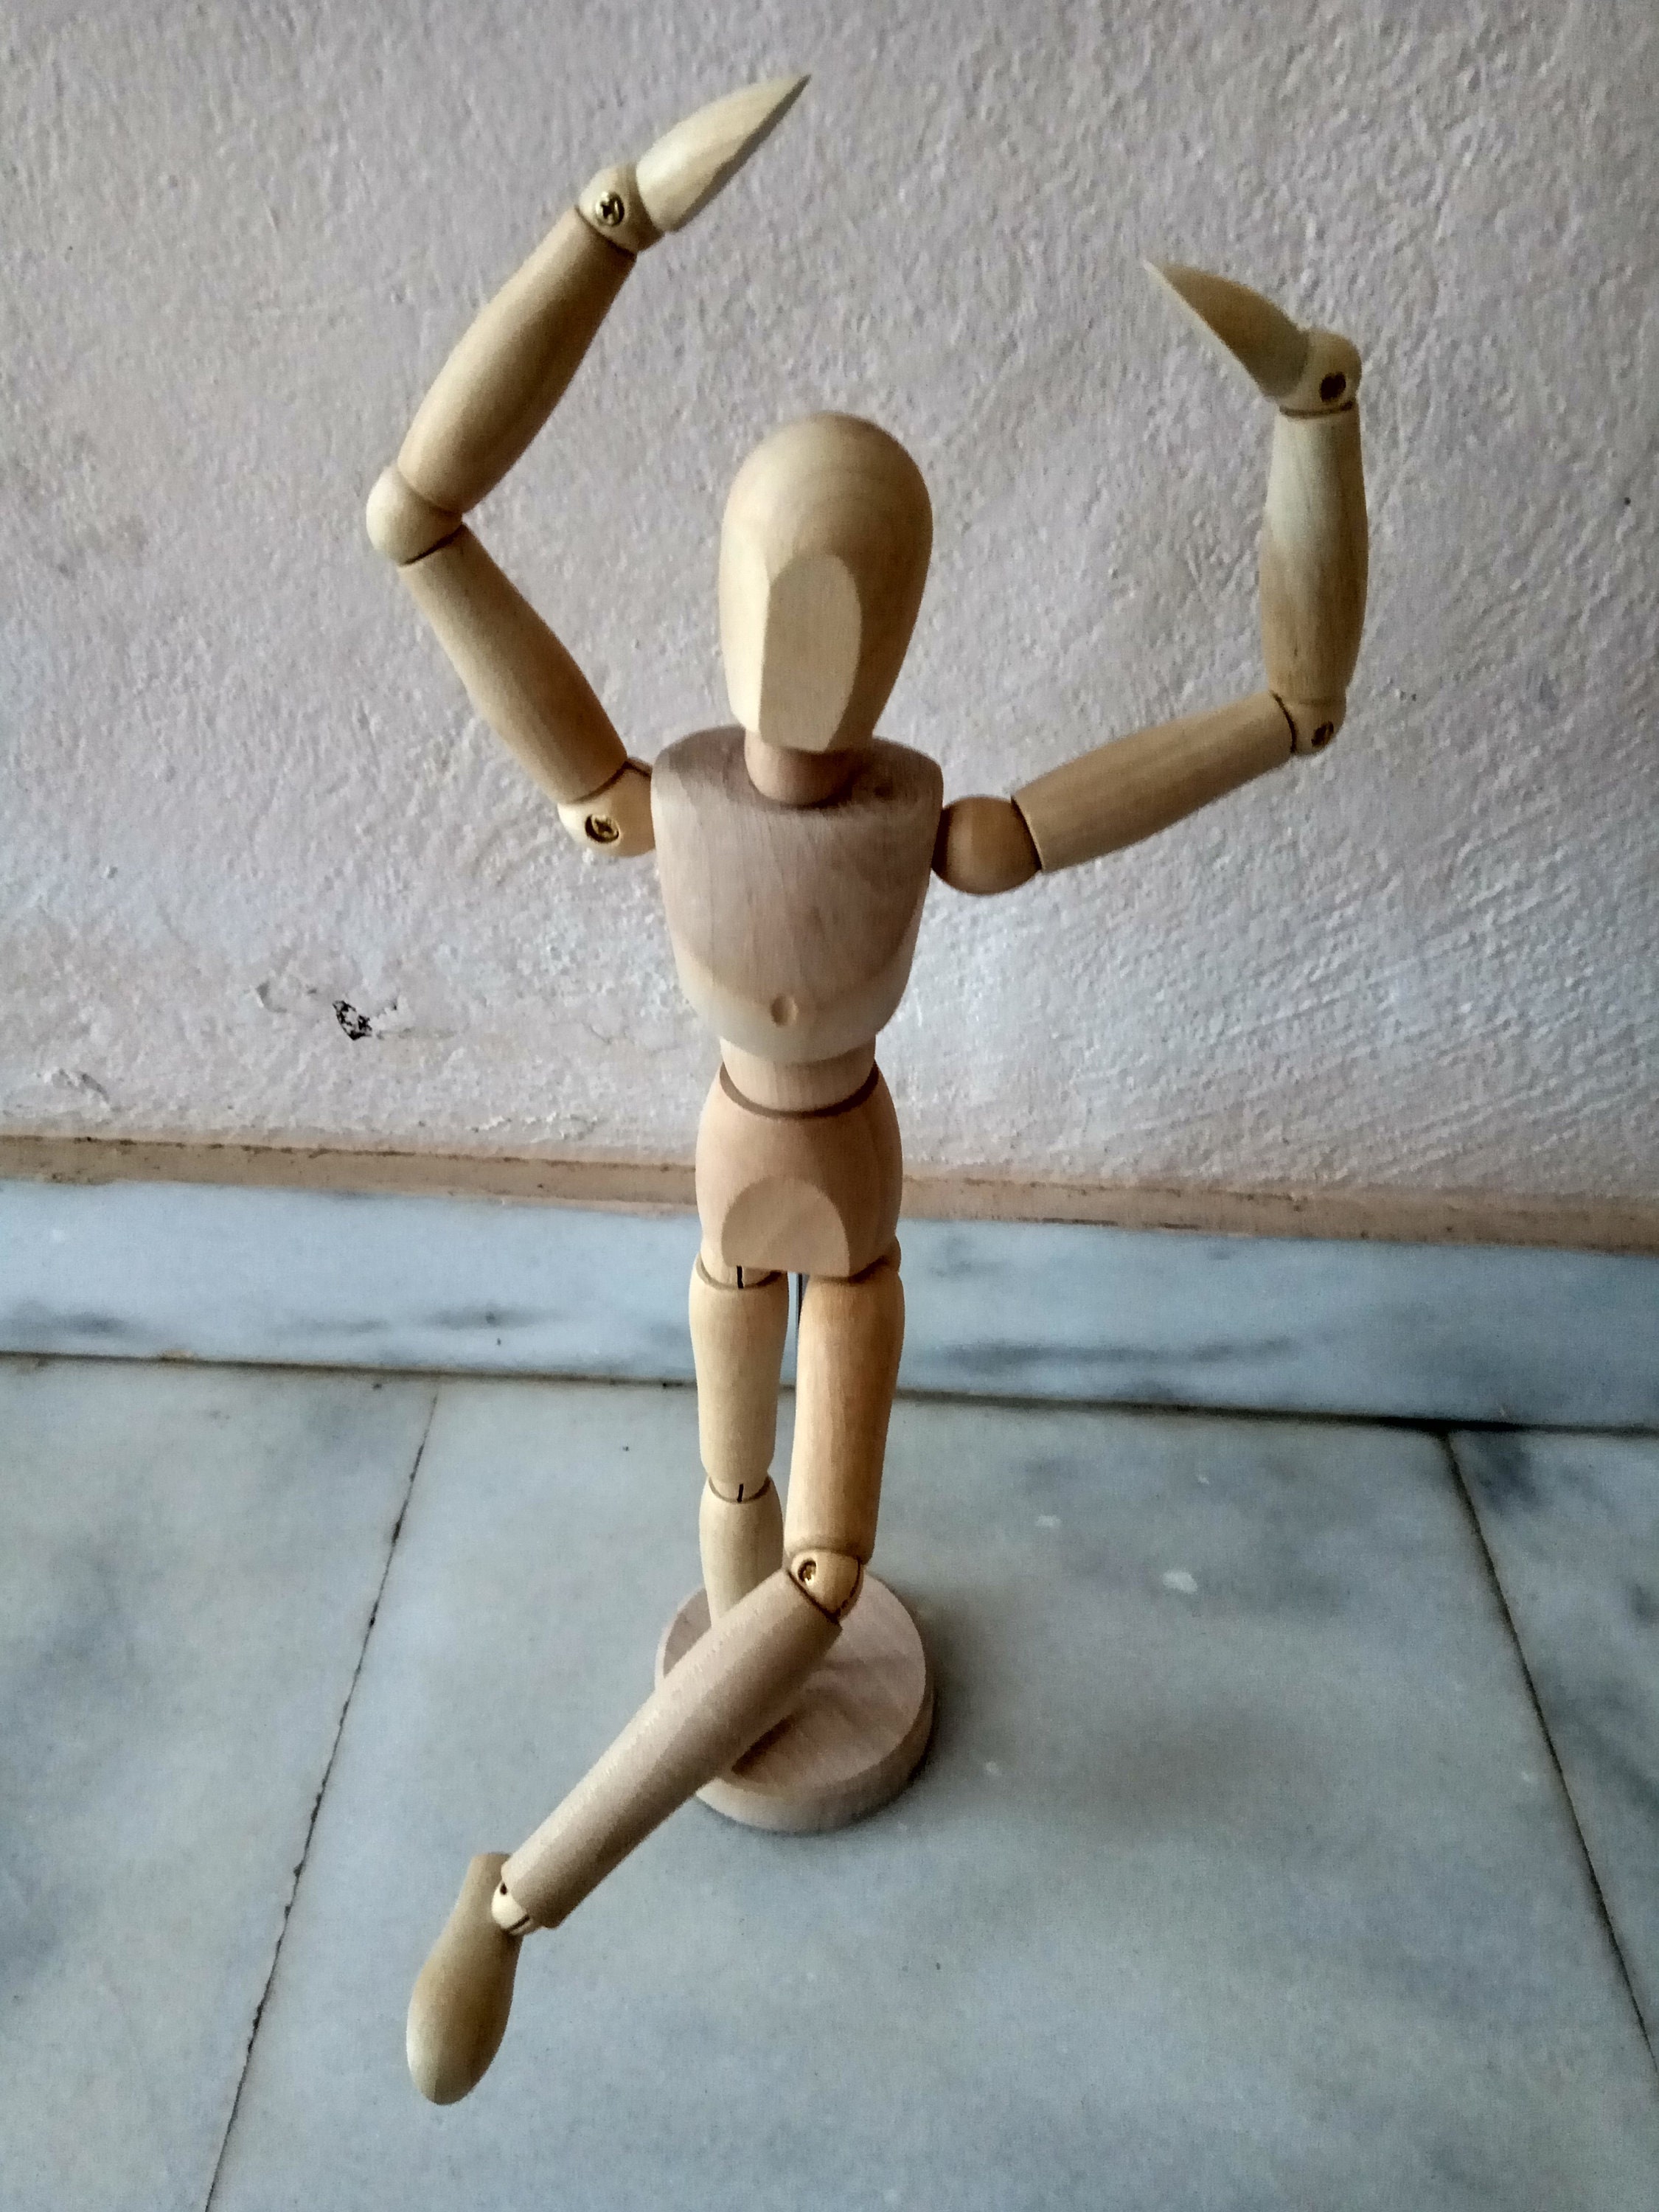 Artist's Dummy Wooden Manequin Standing on a Wooden Base, 12 Tall 30cm  Adjustable and Posable Figure Reference for Drawing-sketching -  Norway